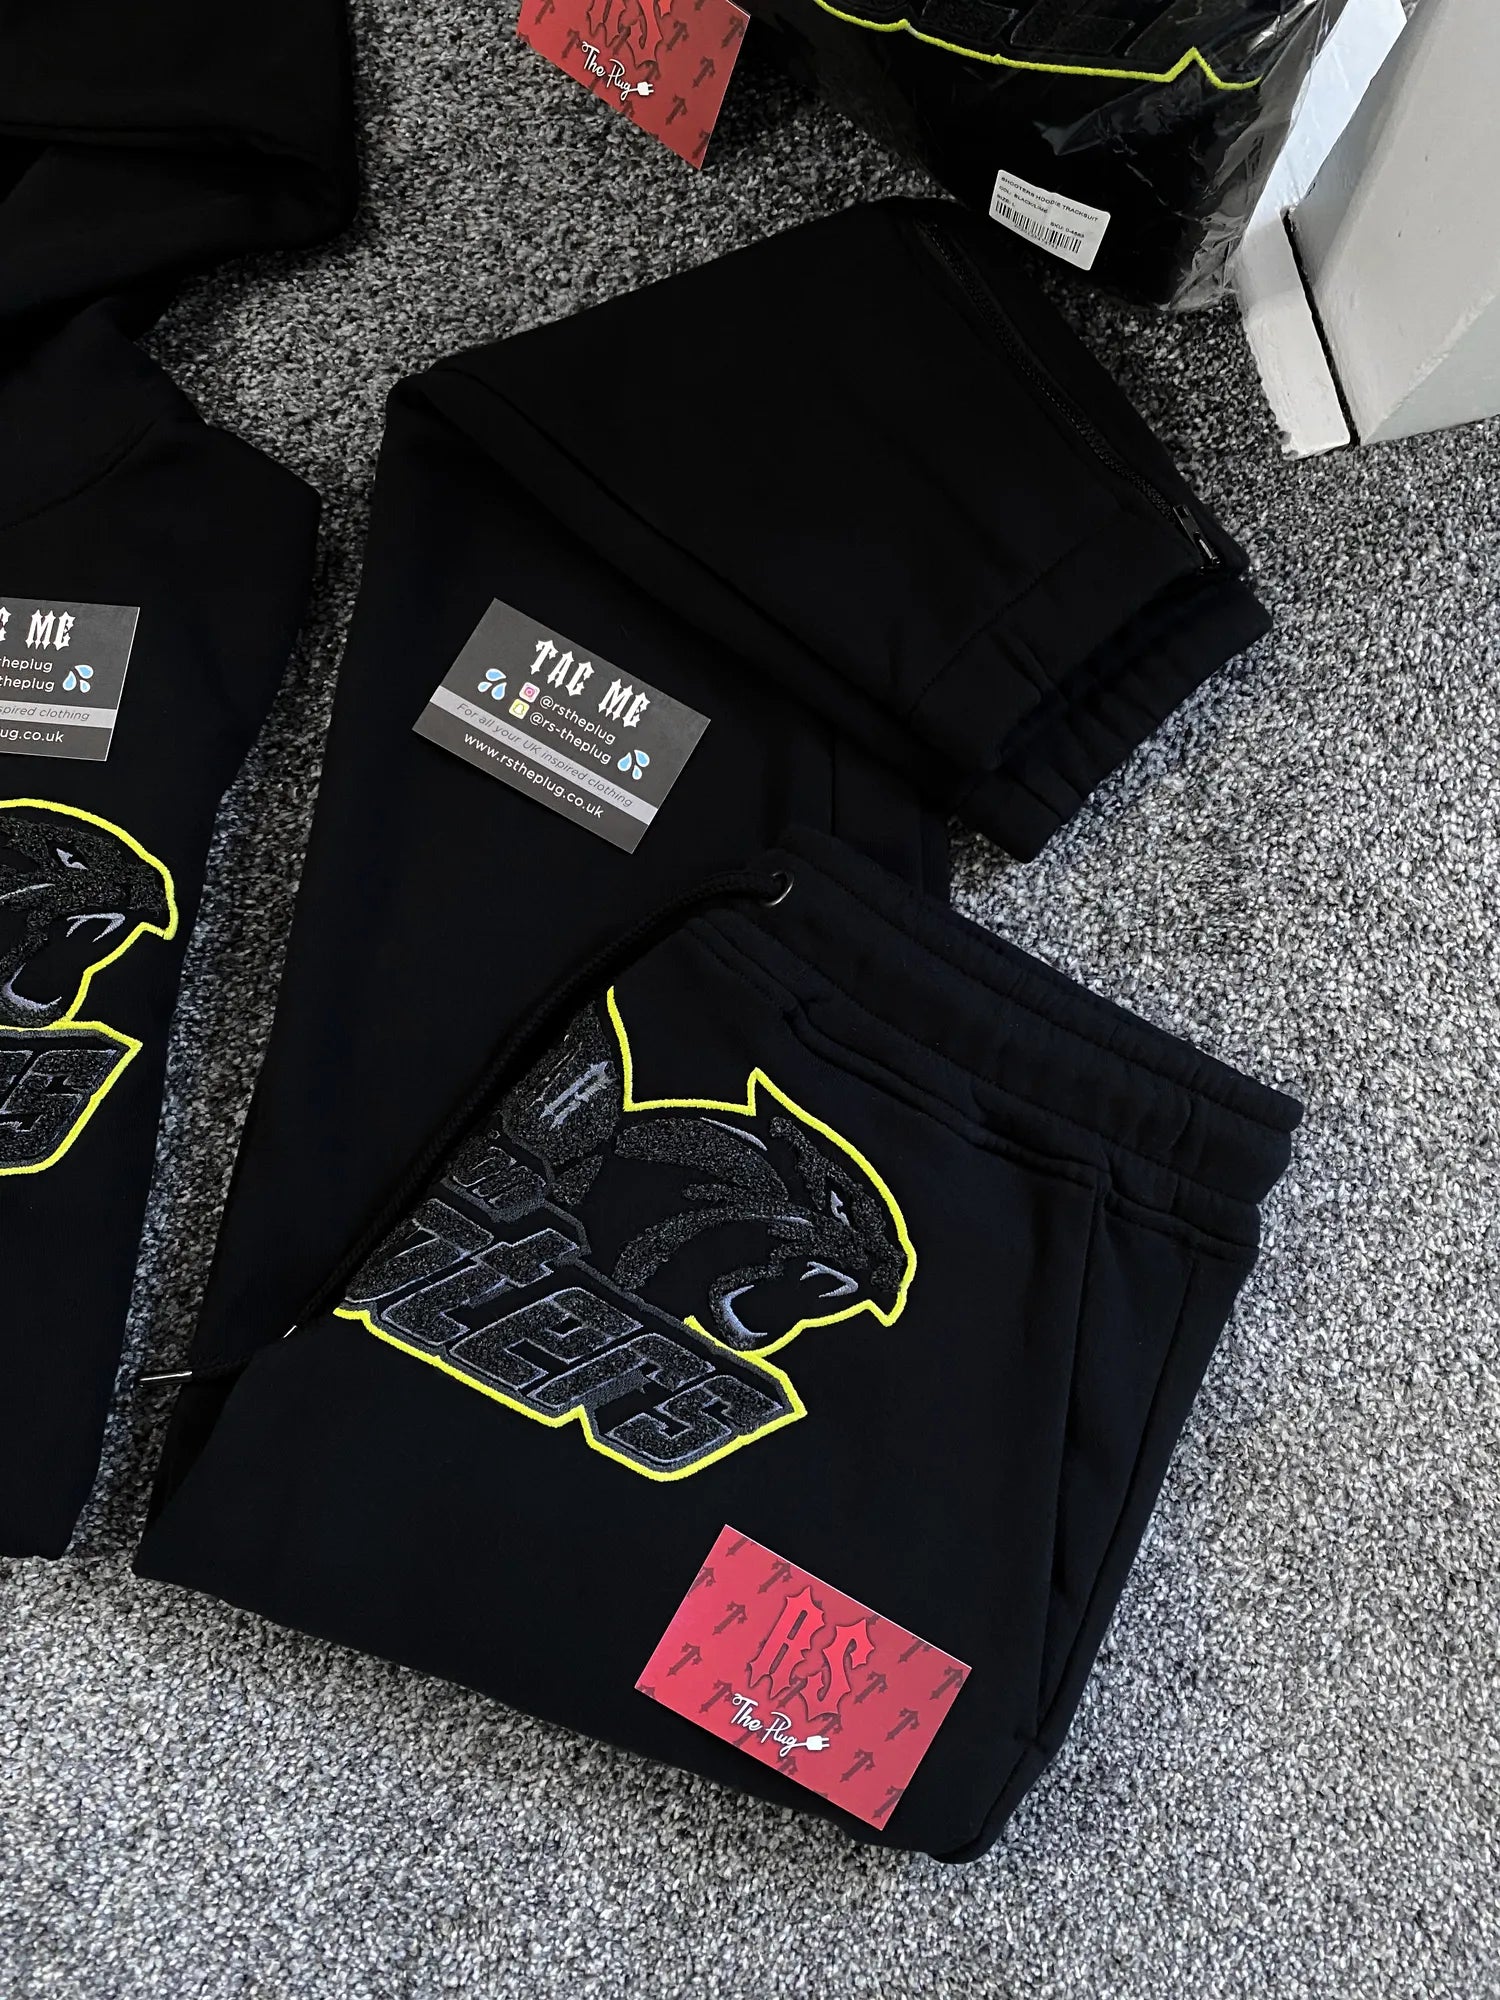 Trapstar London Shooters Chenille Tracksuit Set Black Lime / Yellow Bottoms